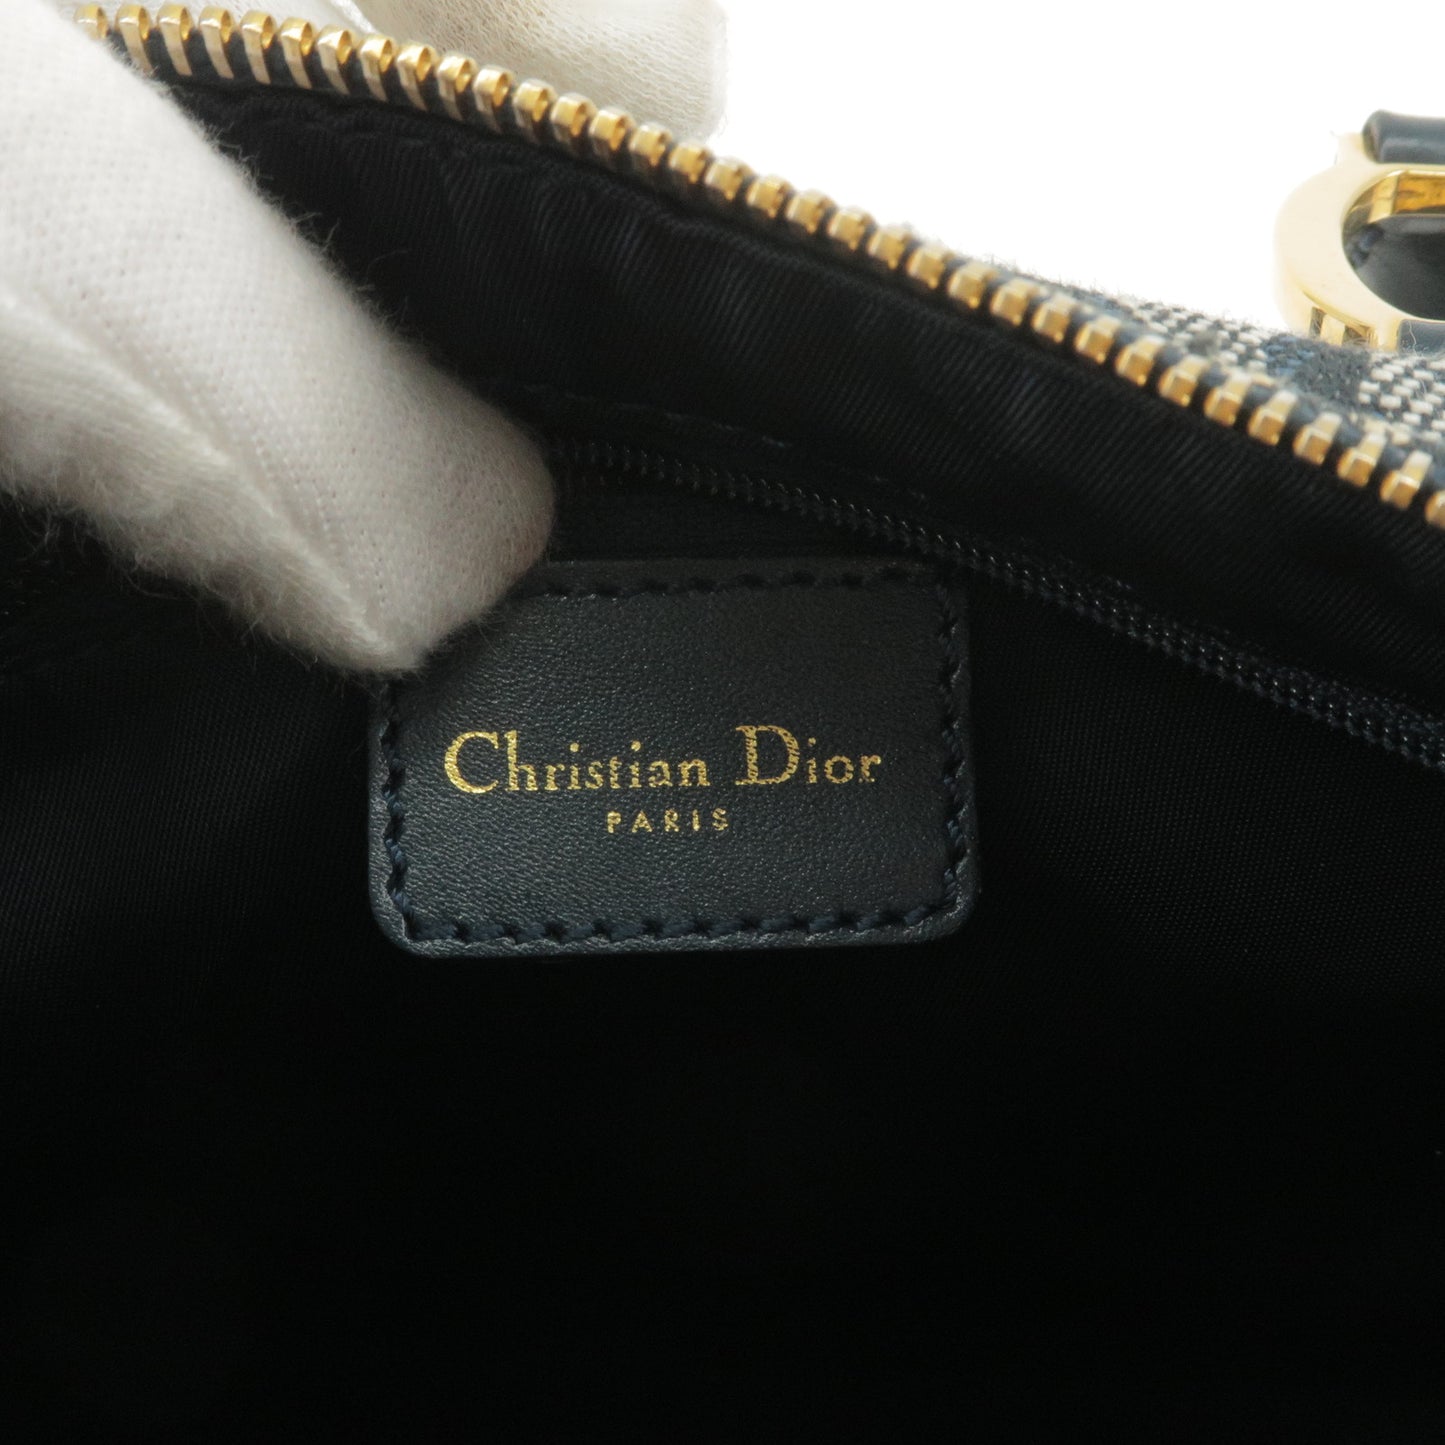 Christian Dior Trotter Canvas Leather Boston Bag Navy